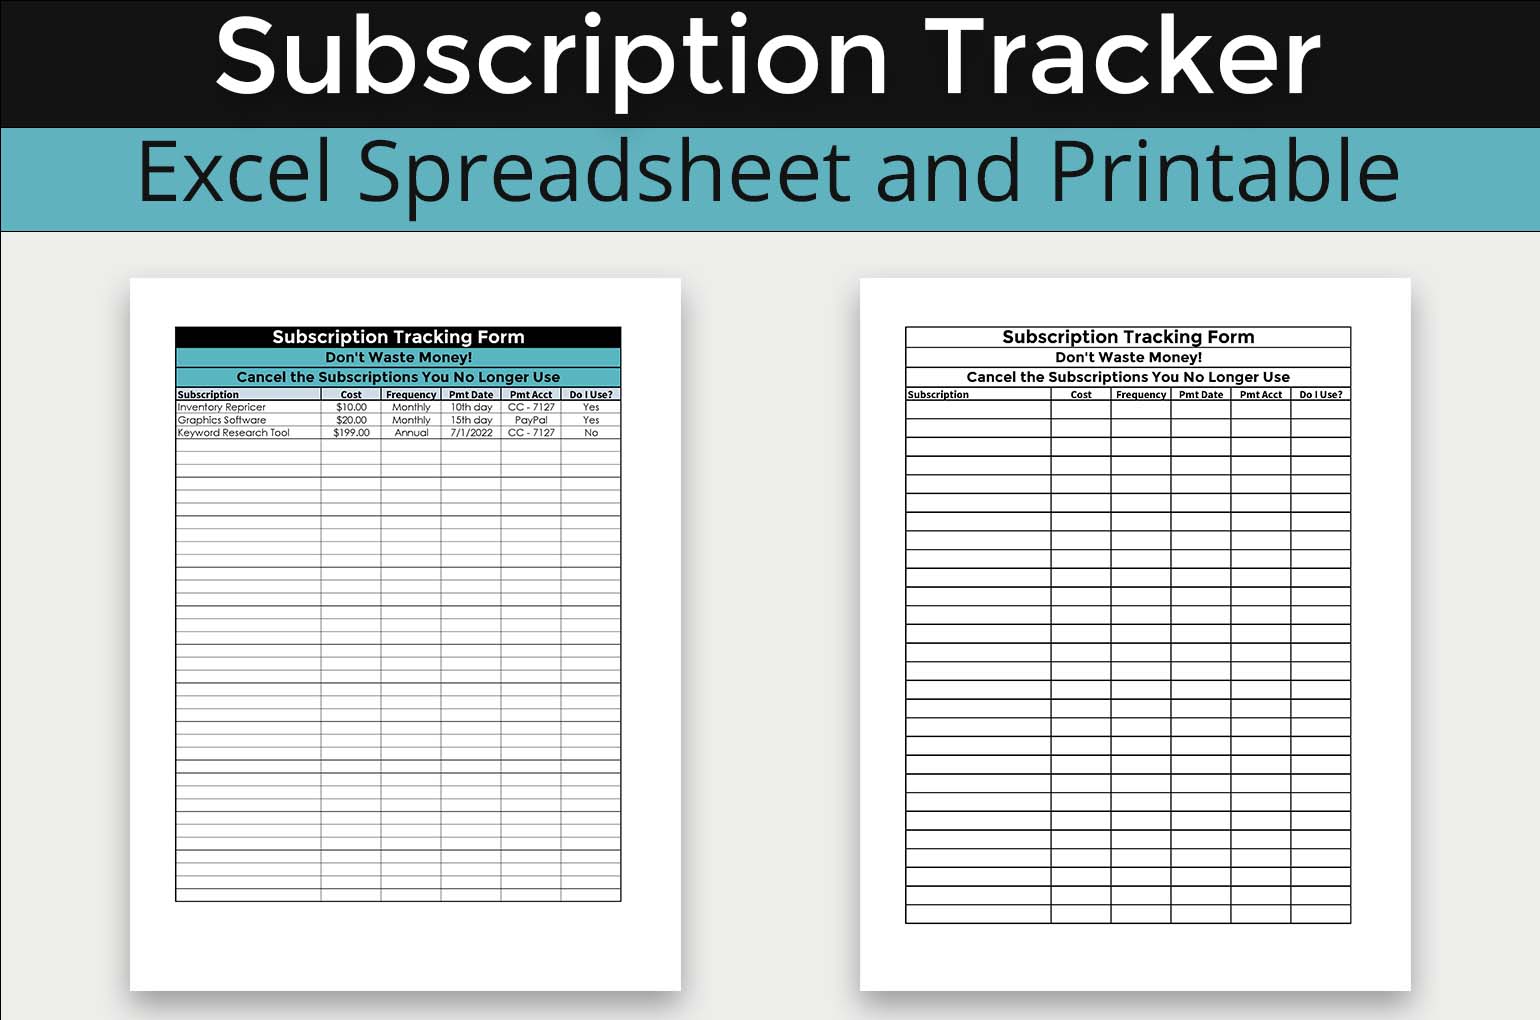 Subscription Tracking Spreadsheet and Printable Second Half Dreams